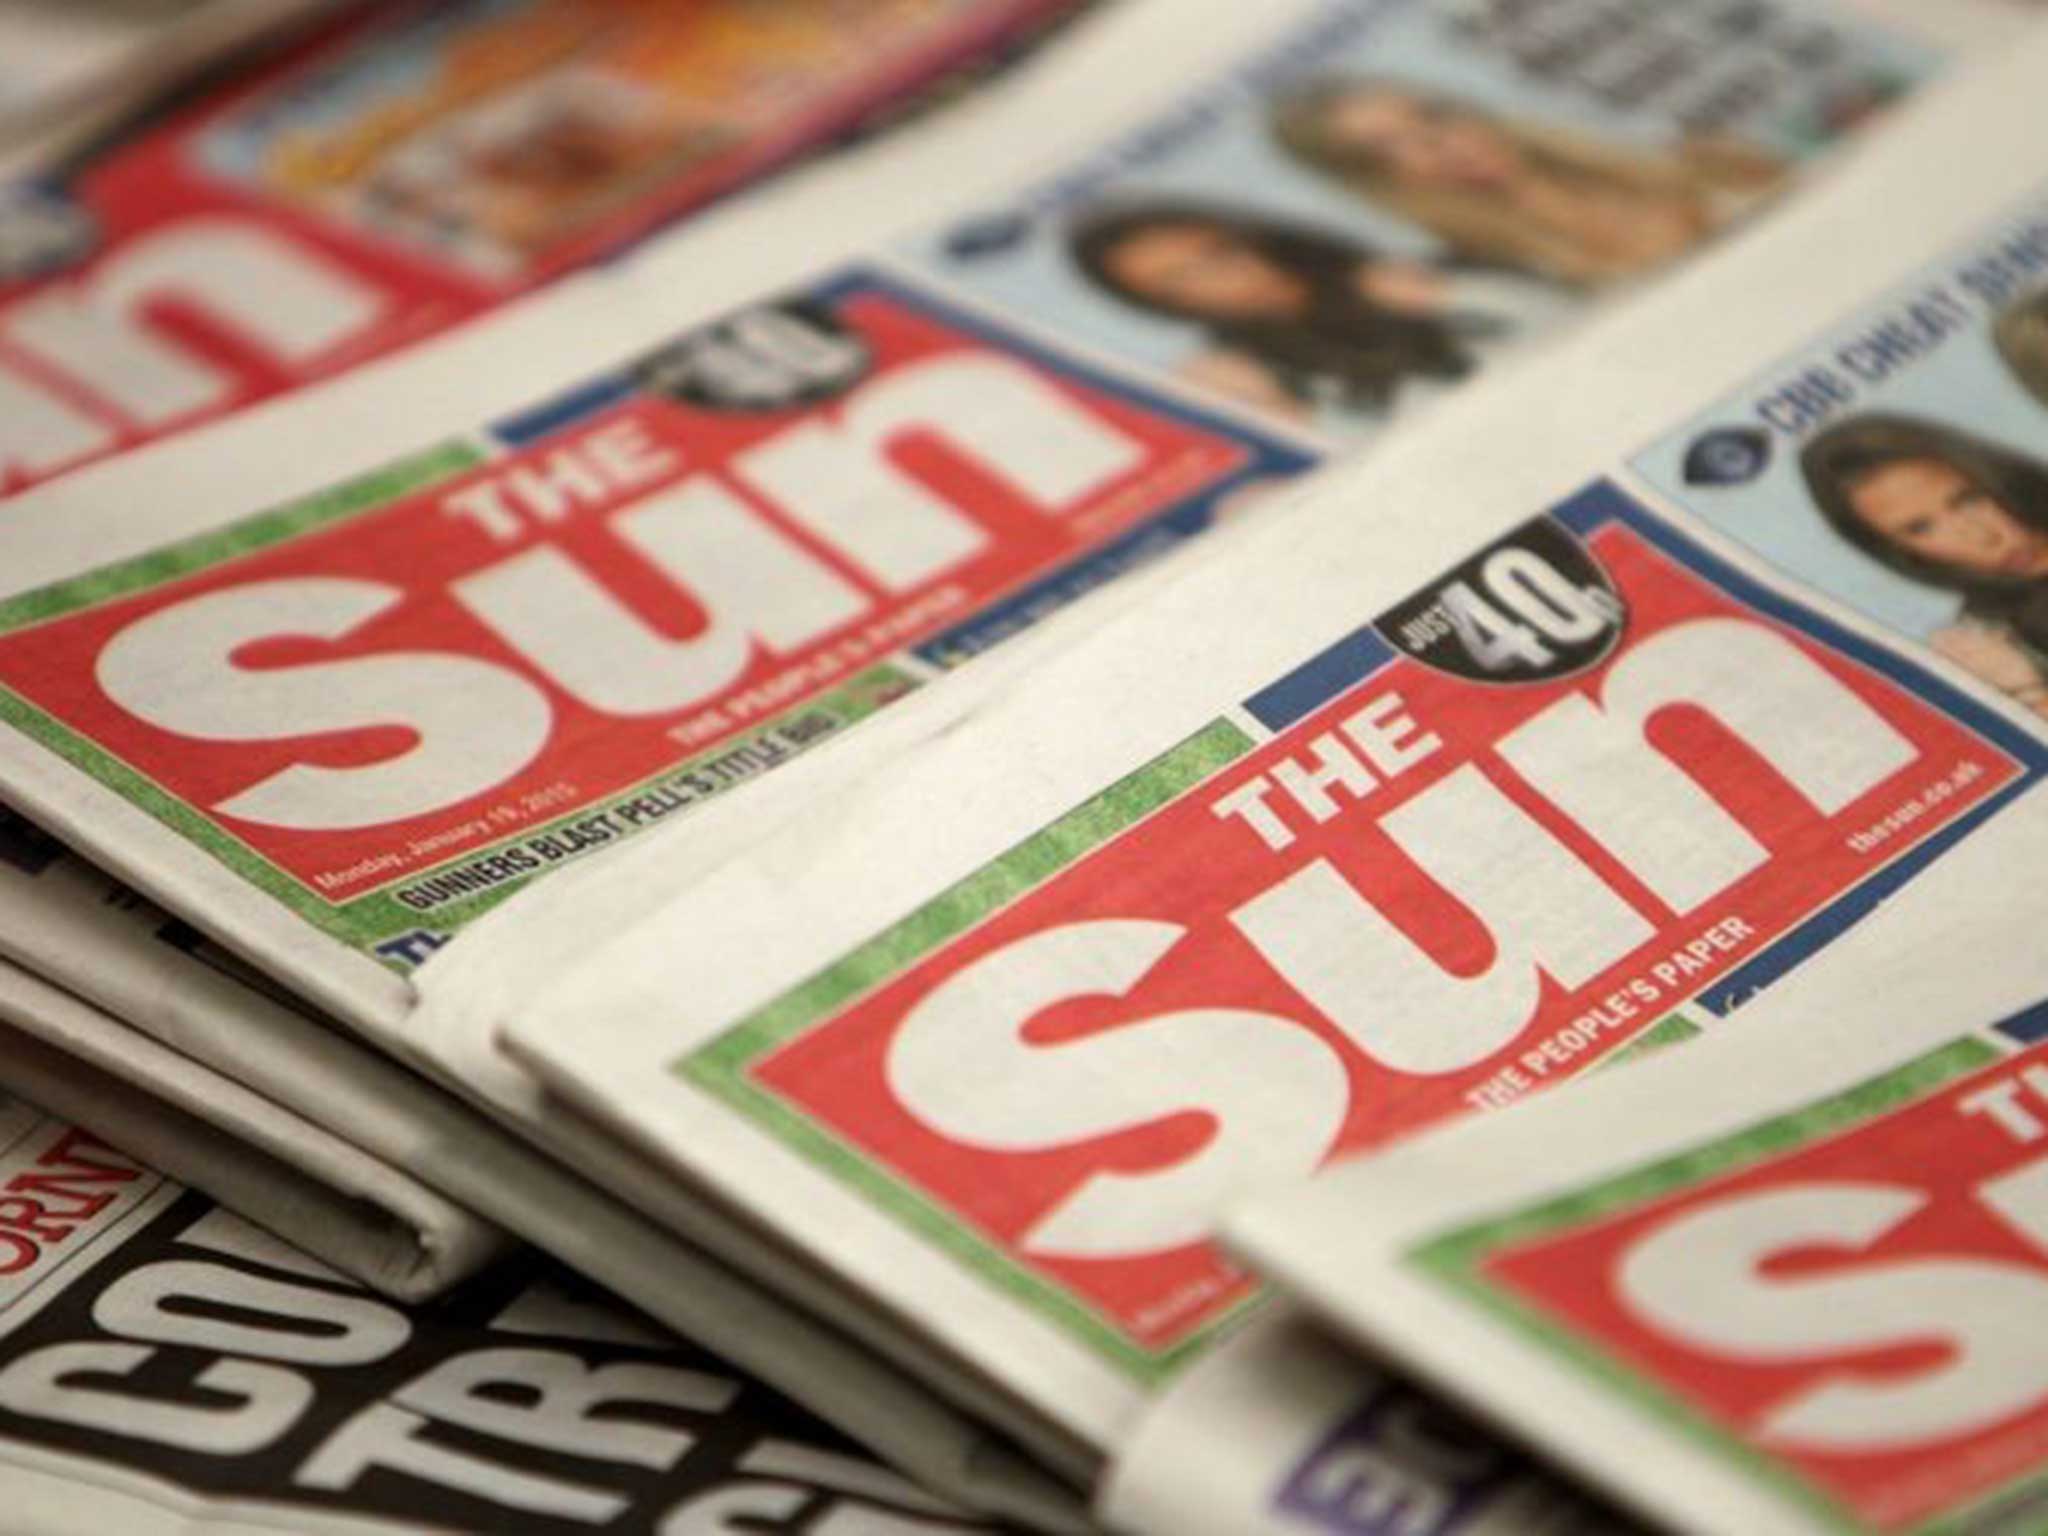 Has The Sun finally scrapped its controversial Page Three?